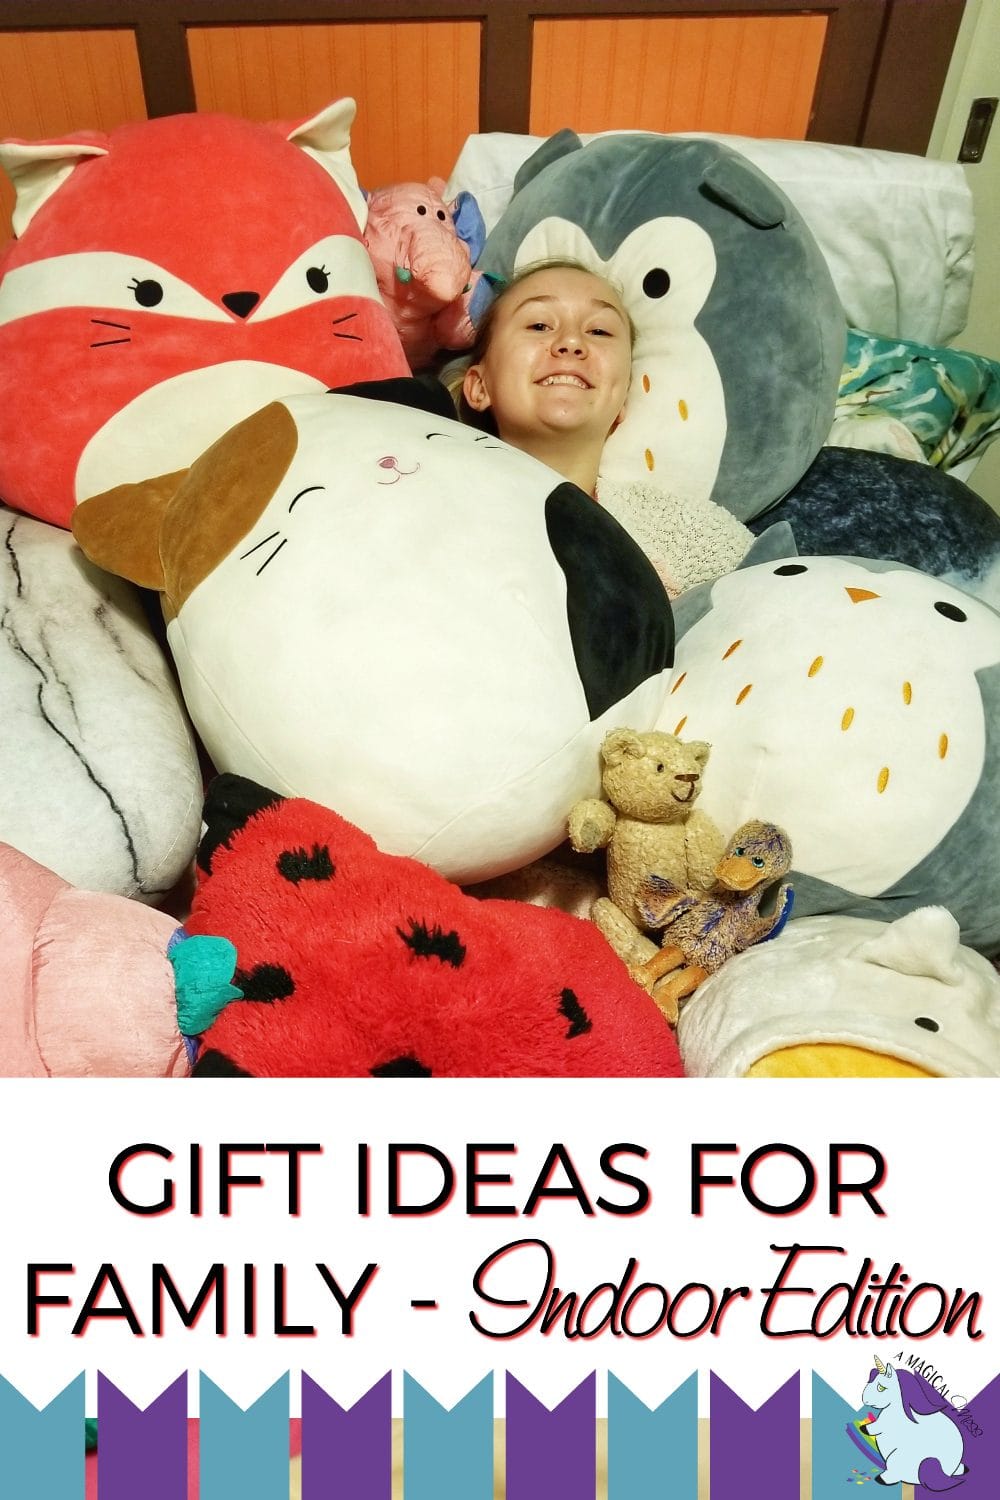 Gift Ideas for Family Fun with Kids - Indoor Edition